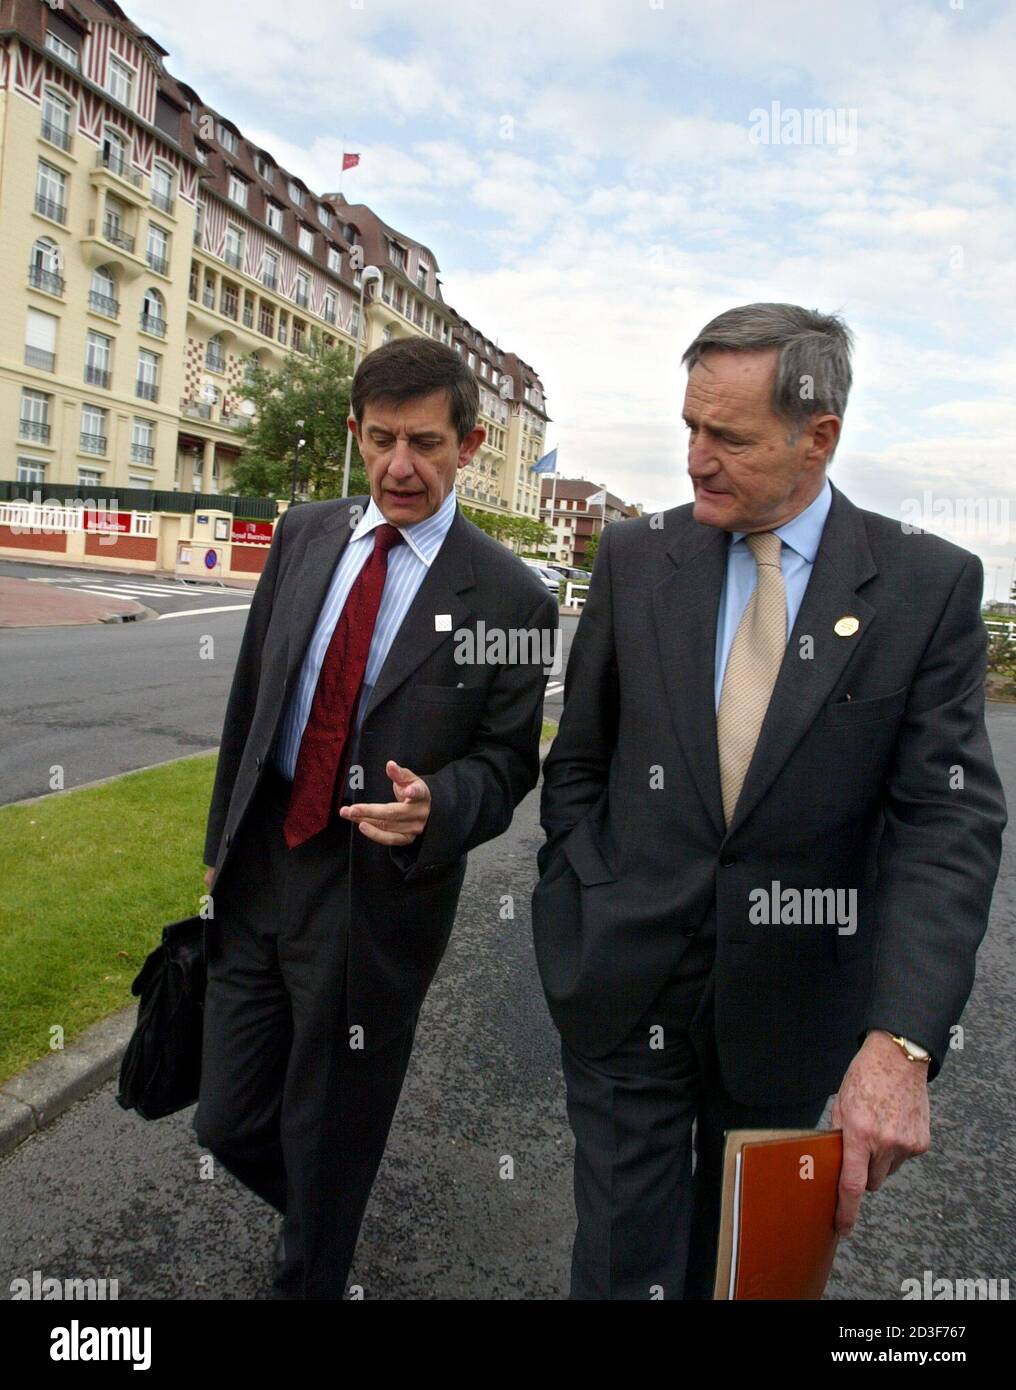 French Finance minister Francis Mer (R) speaks with his chief advisor and Treasury Director Jean-Pierre Jouyet (L) on their way to the first working session of the G7/G8 Finance ministers meeting in Deauville, Western France, May 17, 2003. G7 Finance Ministers meet  to prepare for the June 1-3 summit in the French city of [Evian]. Stock Photo